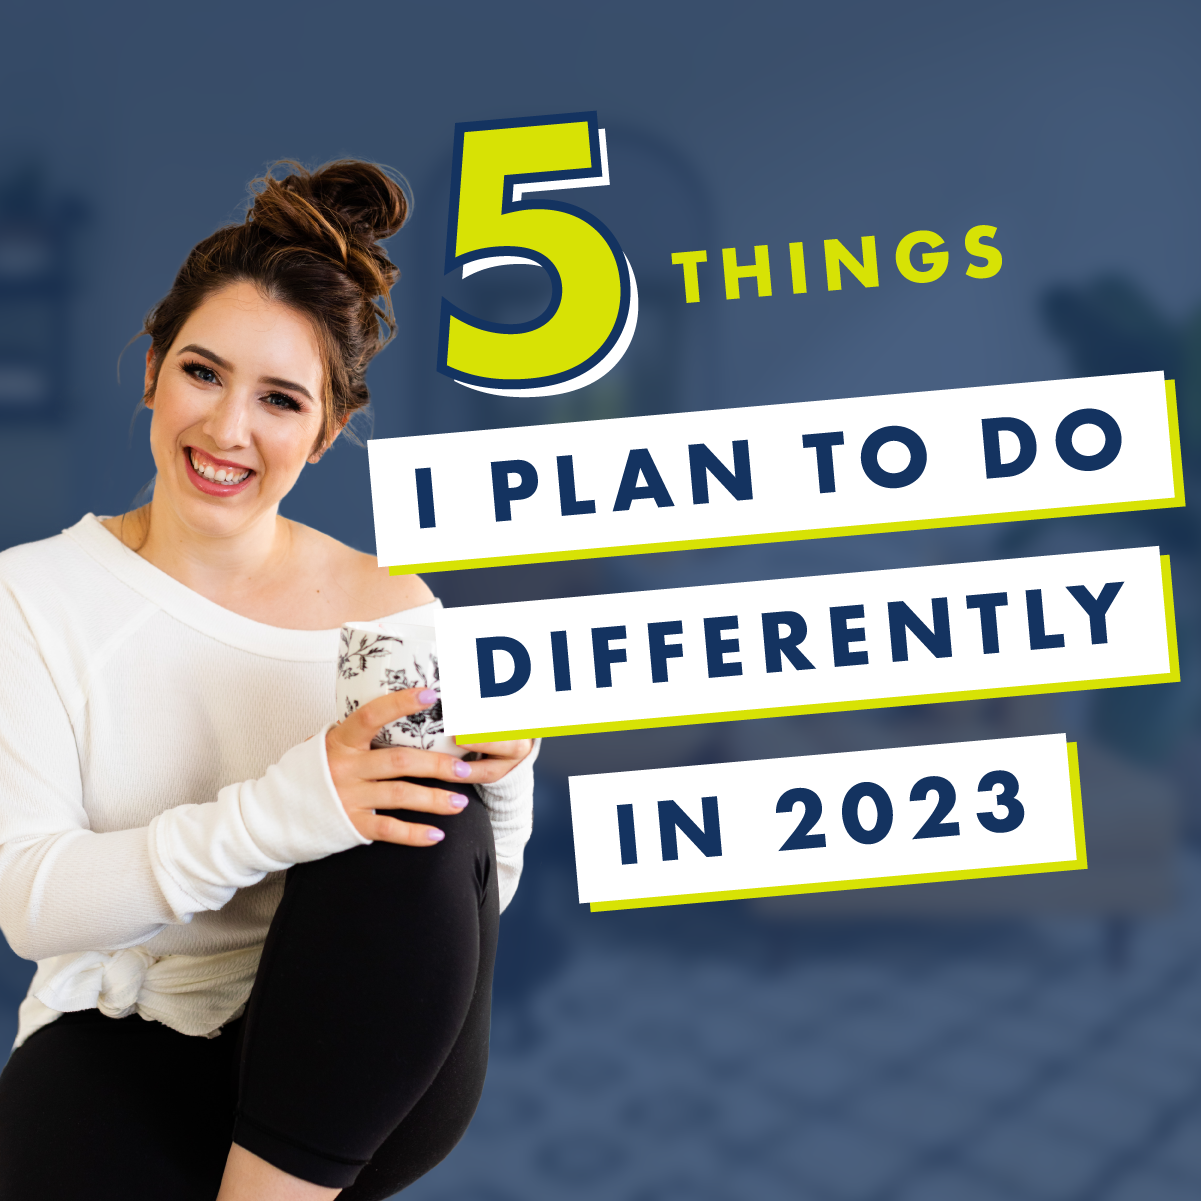 Christina Scalera 5 Things I Plan To Do Differently In My Business In 2023